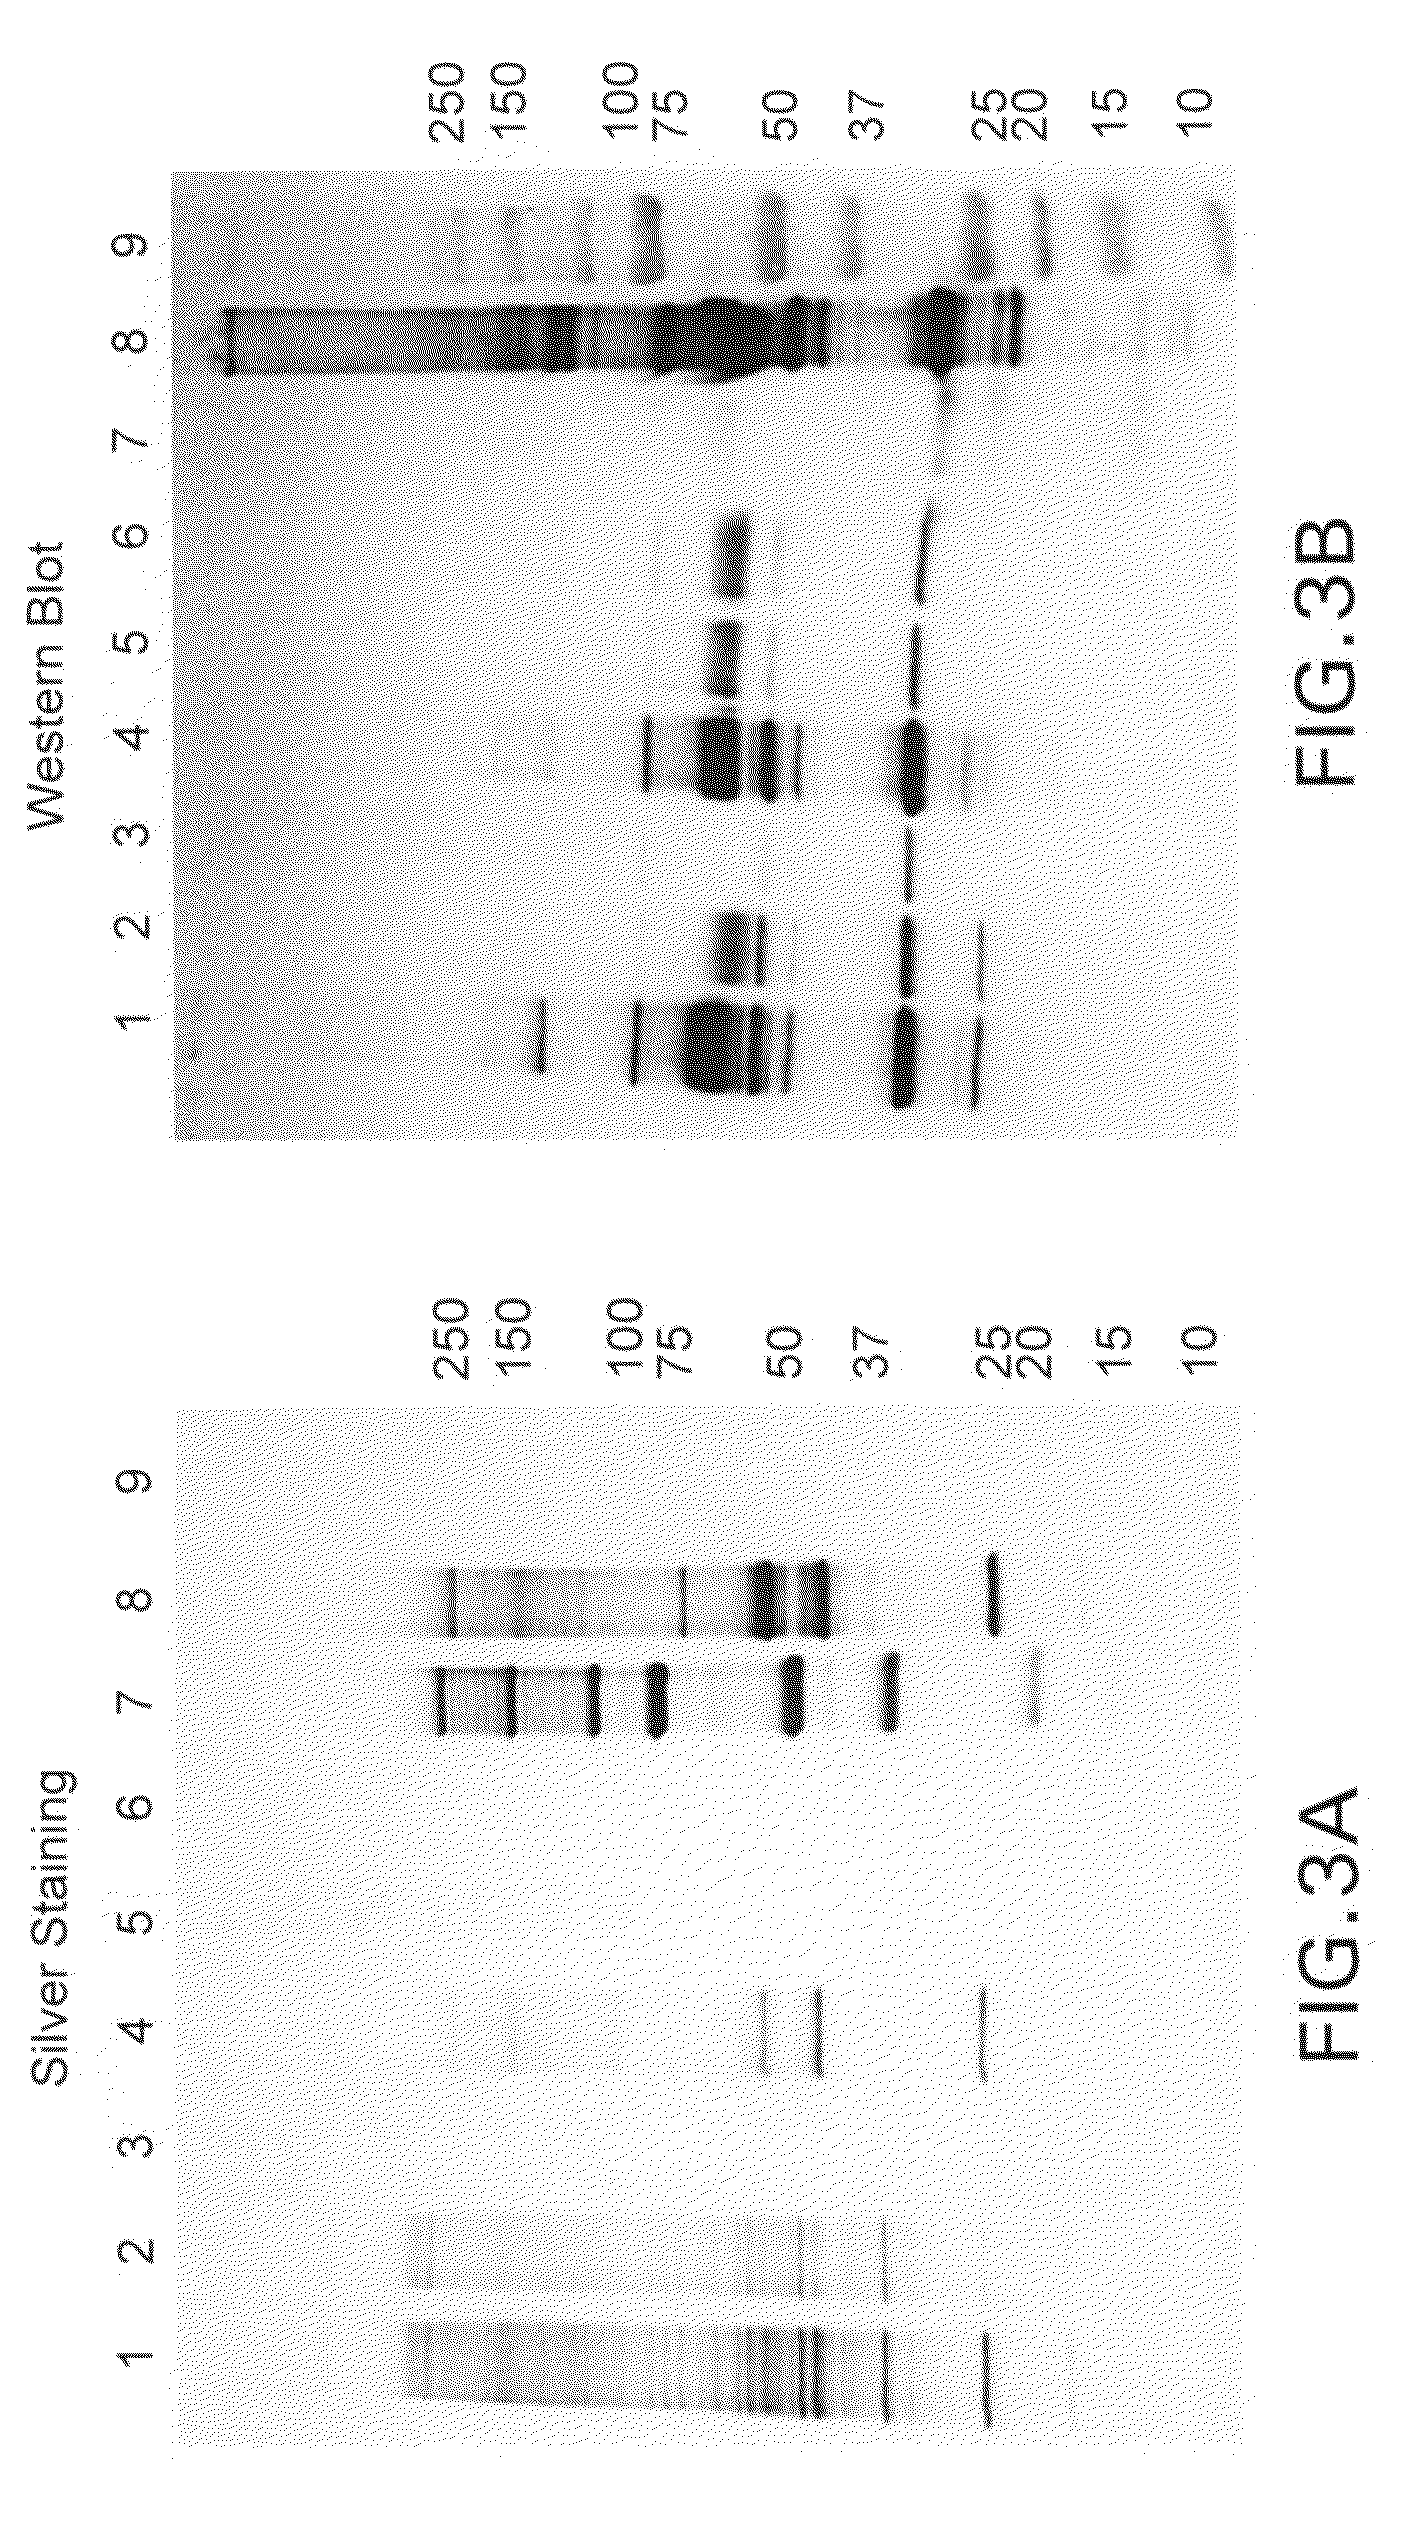 Purification processes for isolating purified vesicular stomatitis virus from cell culture